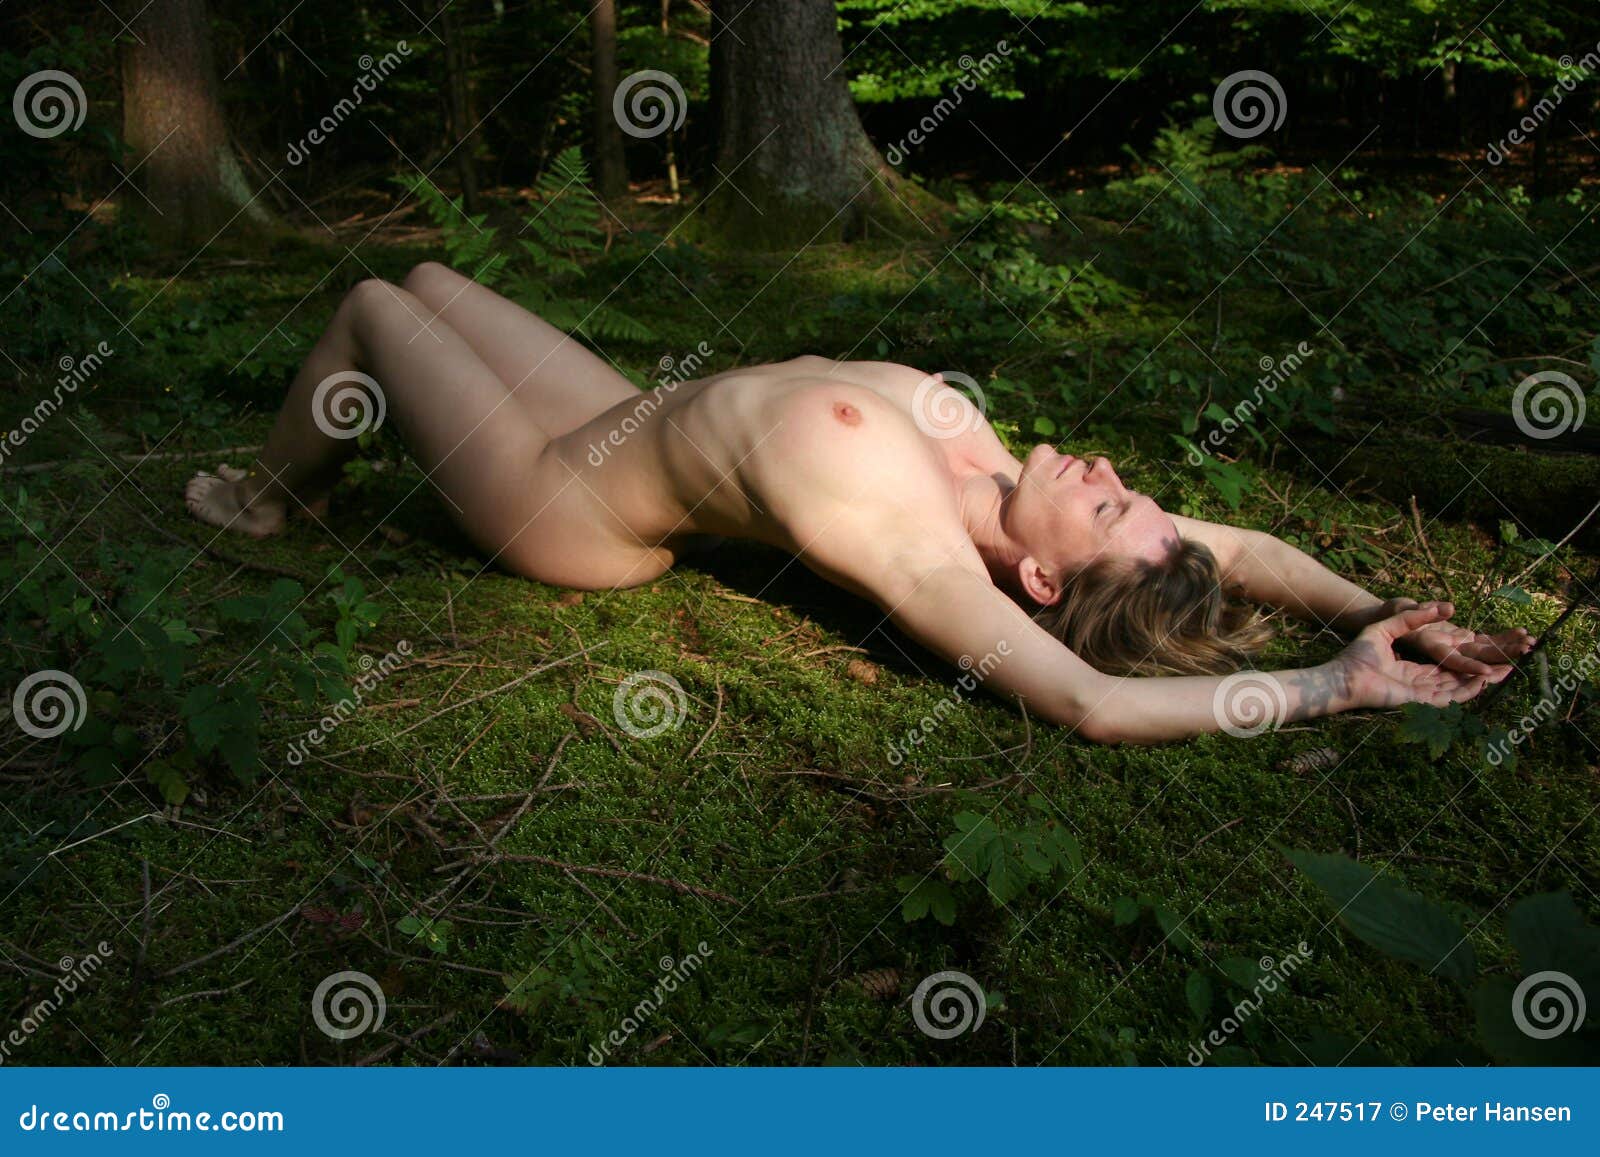 Forest nude the 